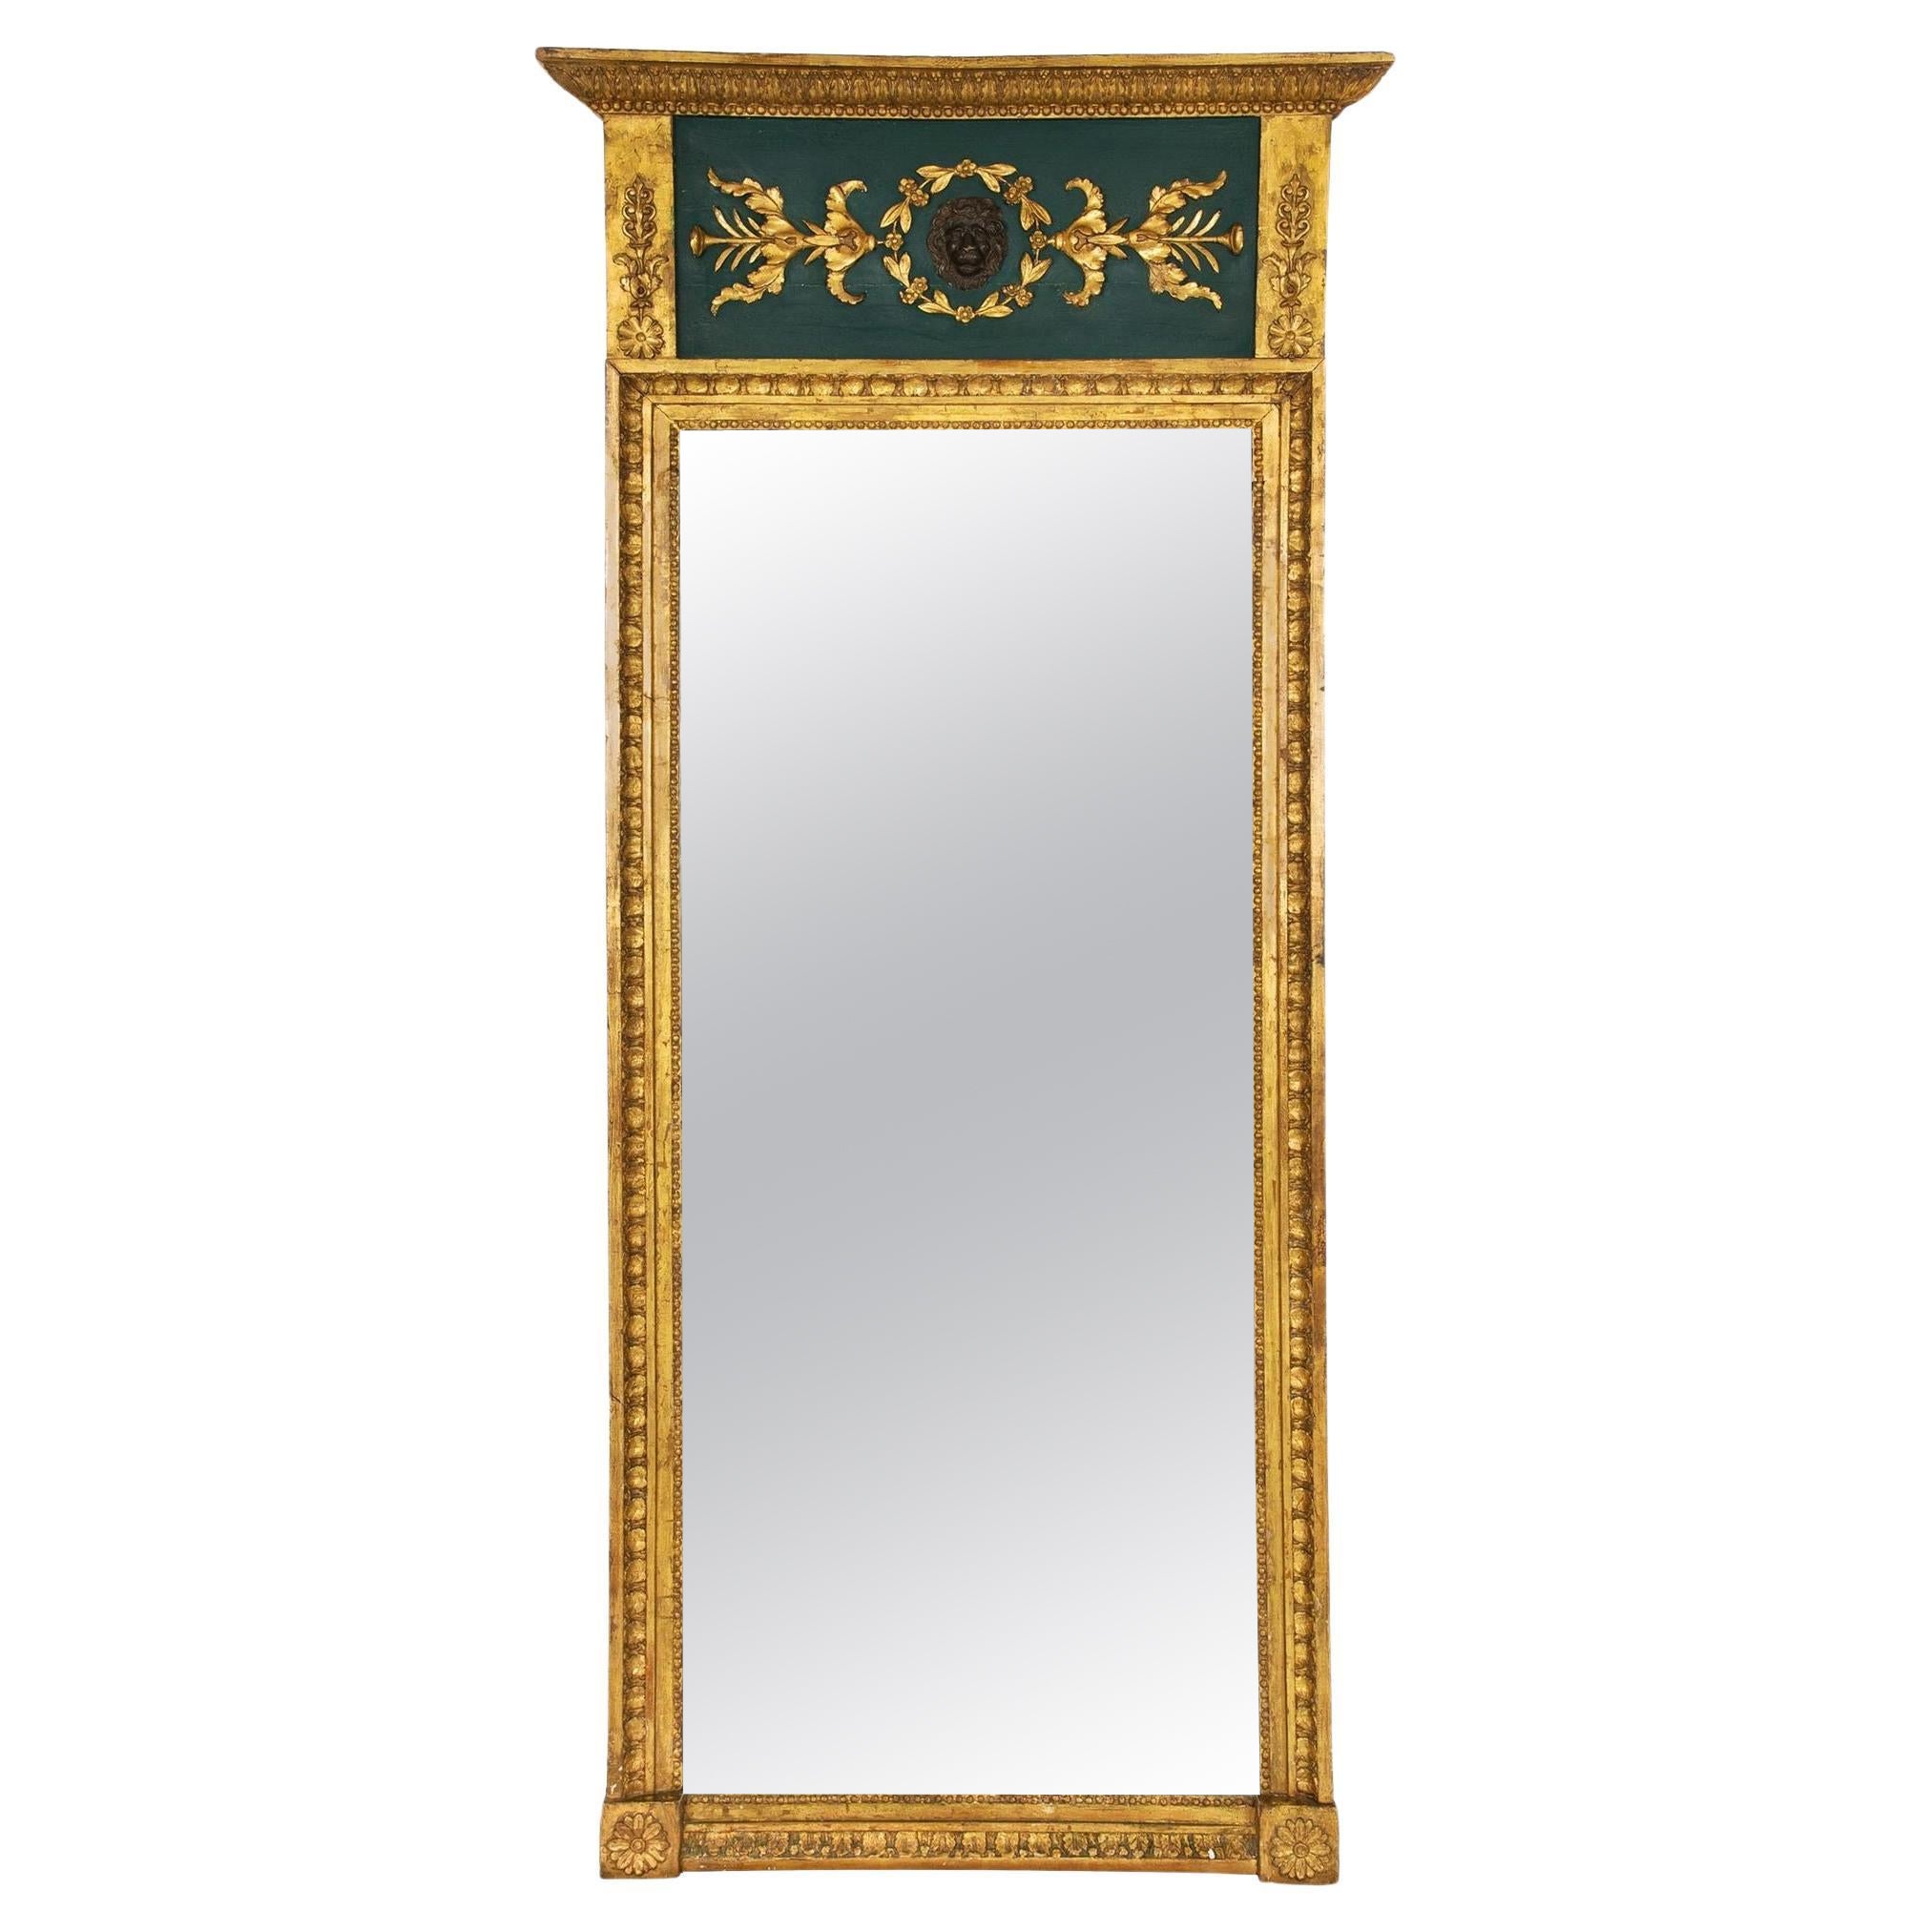 Regency Period Gilded Pier Mirror with Lion’s Mask, early 19th century